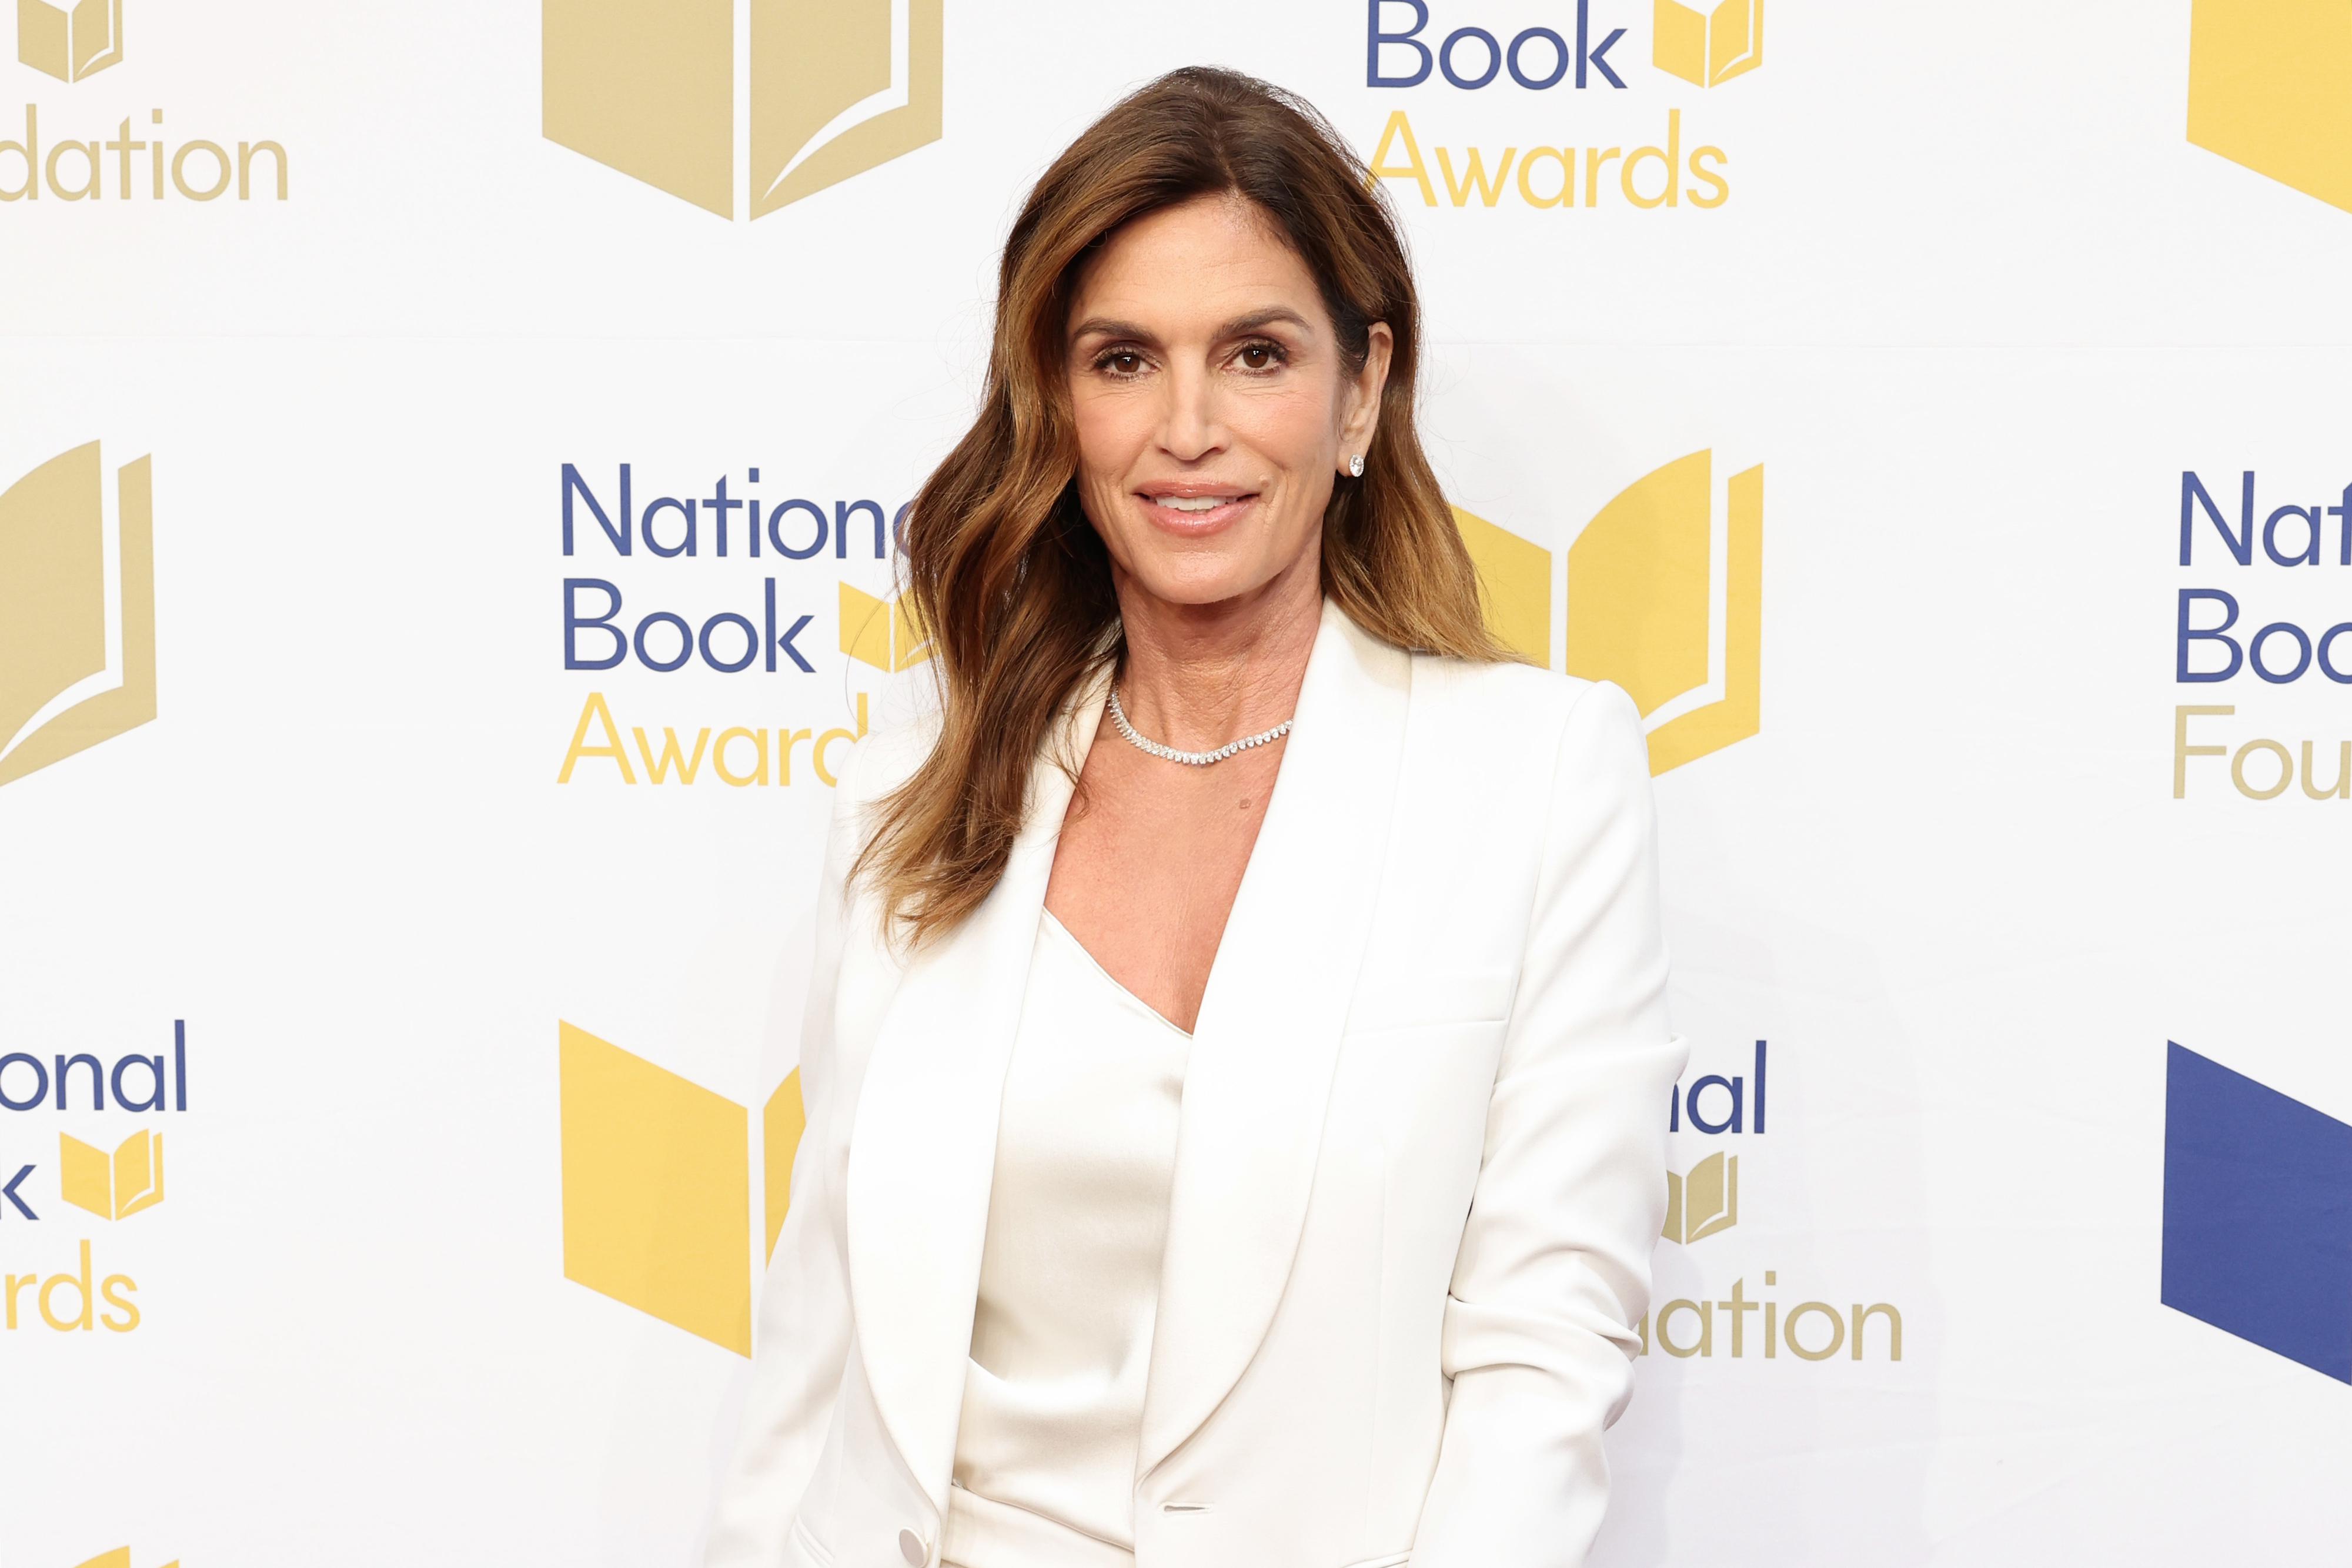 Cindy Crawford poses in a suit at the National Book Awards event